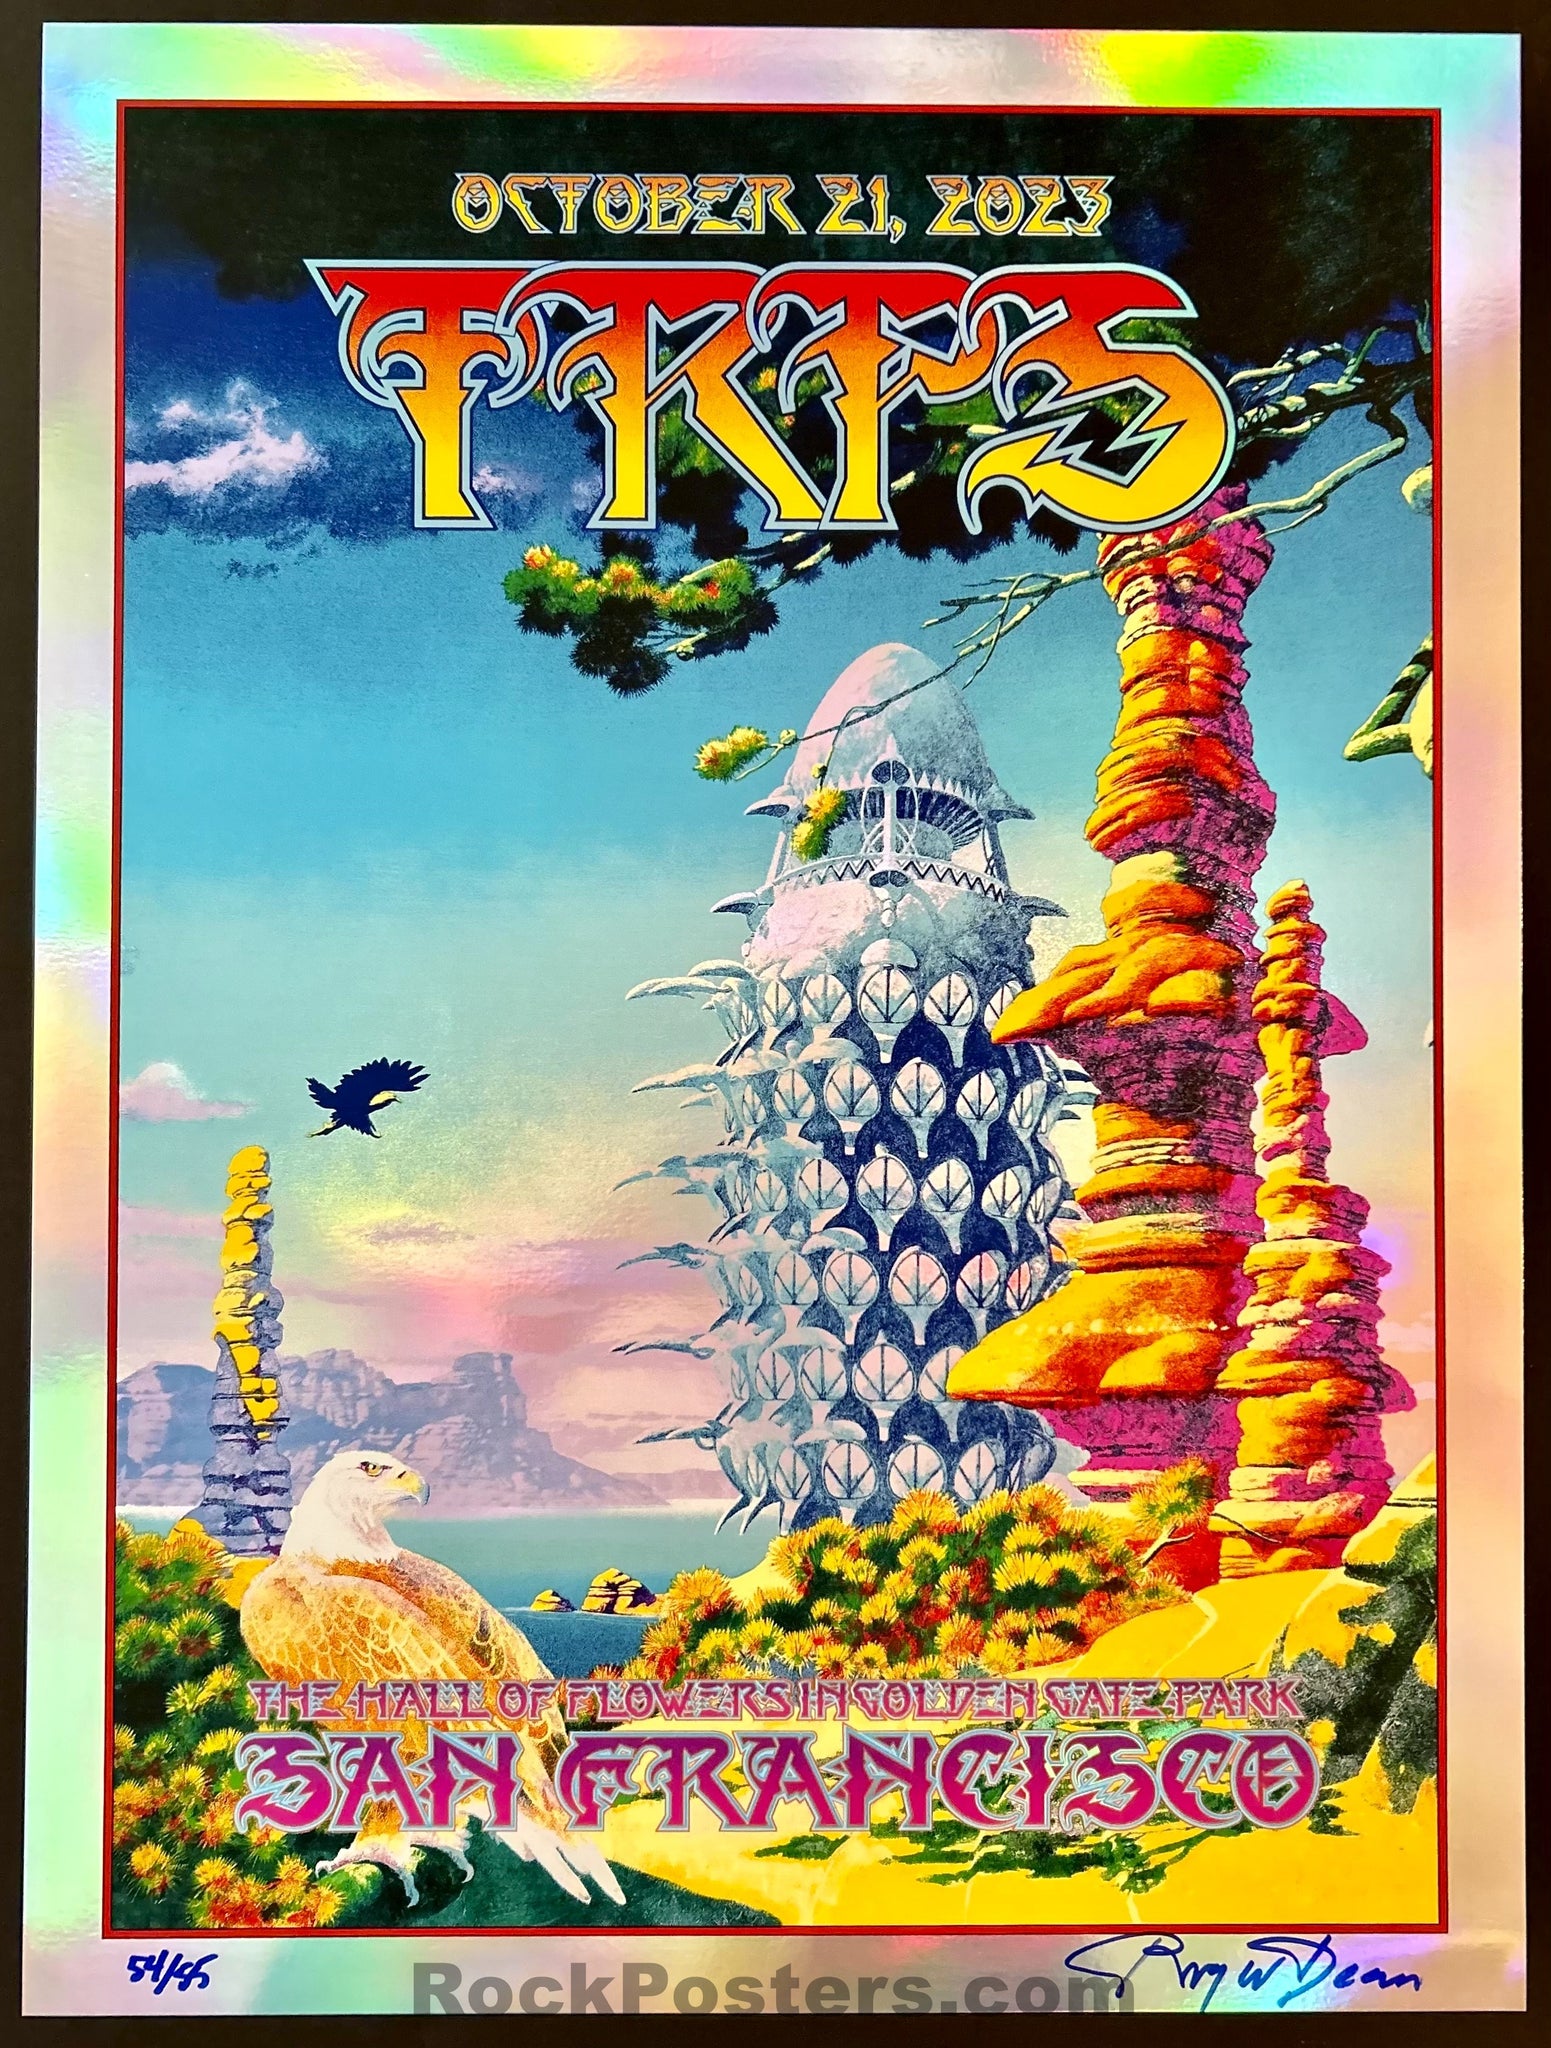 AUCTION - The Rock Poster Society - TRPS '23 - Roger Dean - Foil Variant Edition - Mint